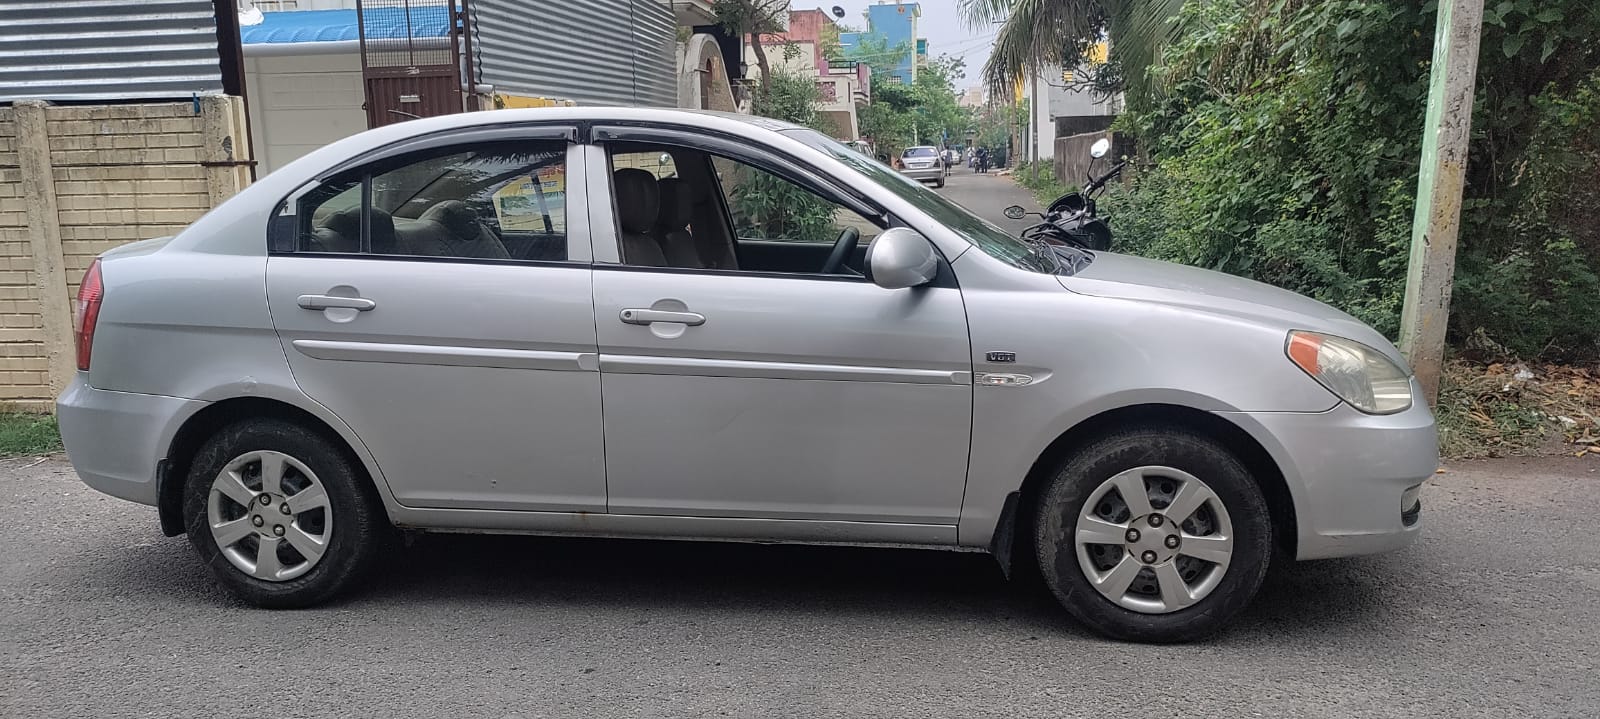 4460-for-sale-Hyundai-Verna-Diesel-First-Owner-2008-PY-registered-rs-190000